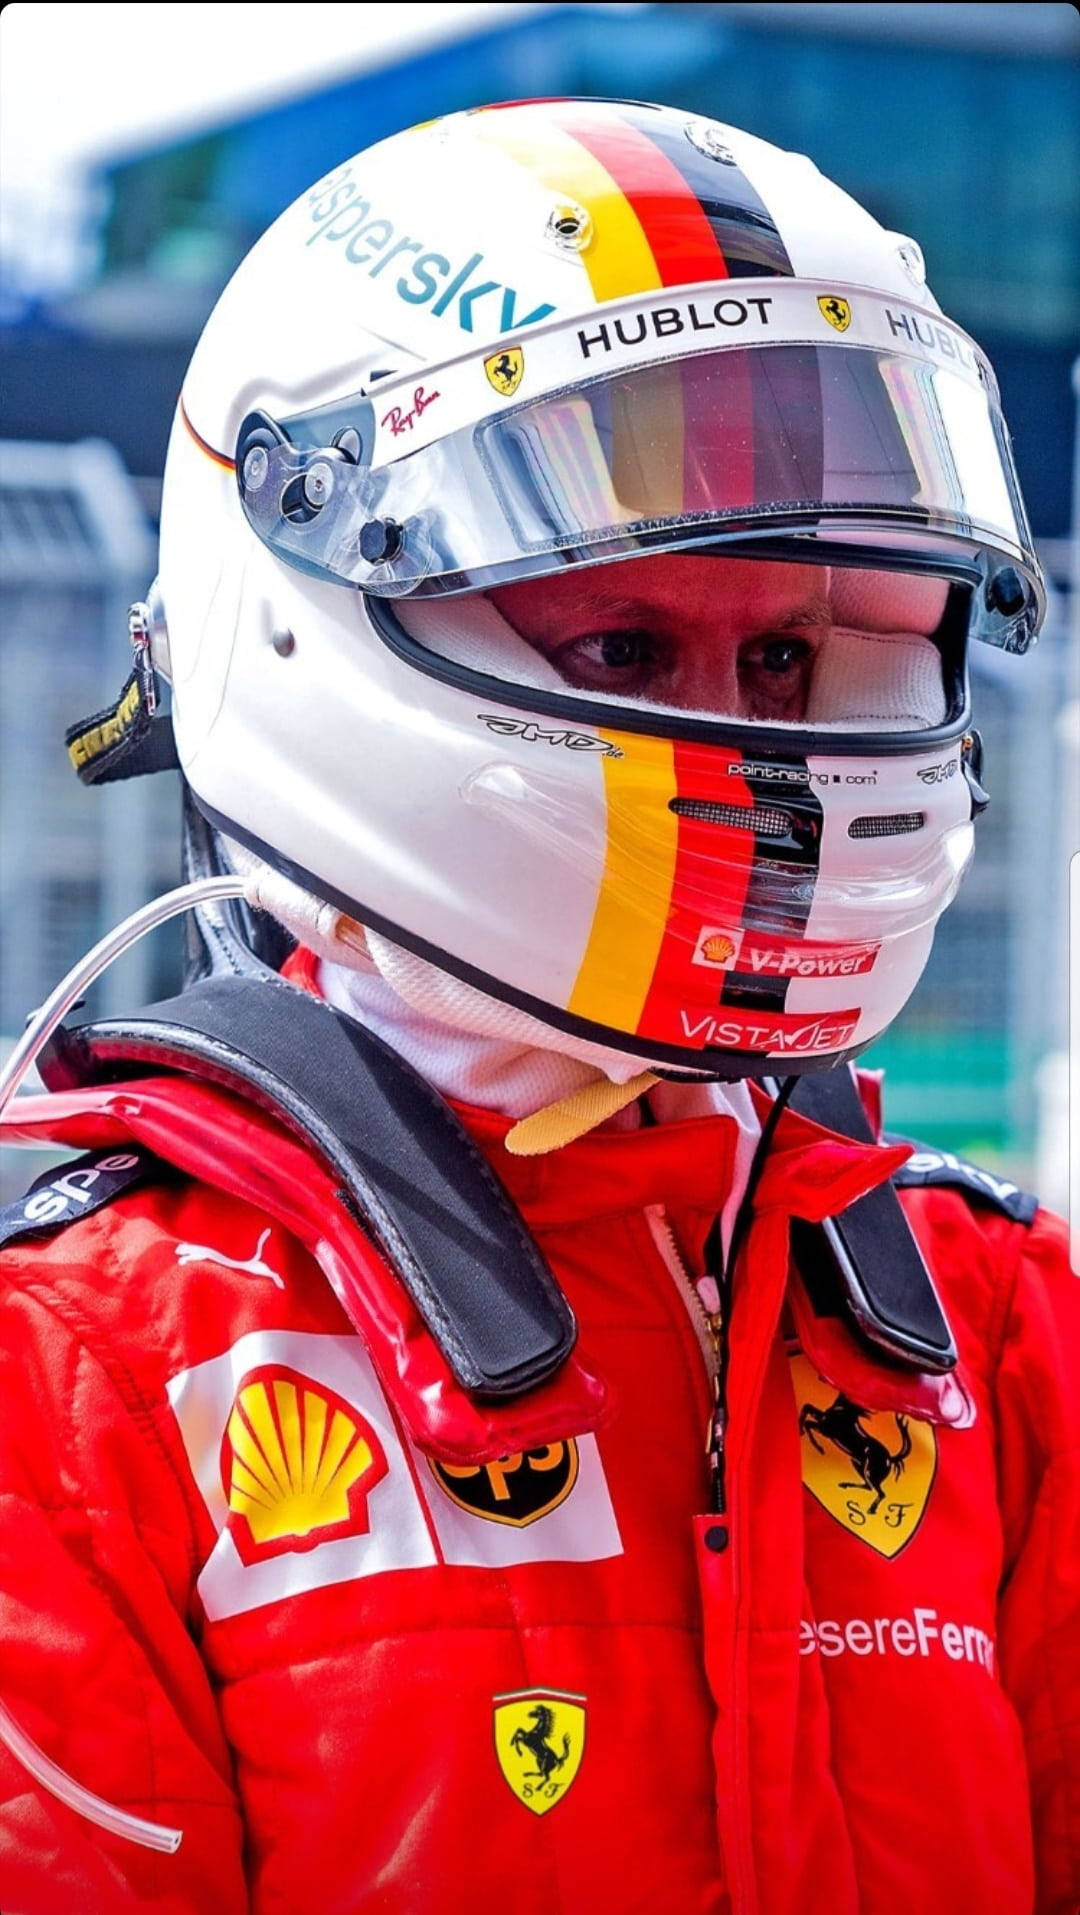 Four-time Formula One World Champion, Sebastian Vettel, In His Racing Suit And Helmet. Background